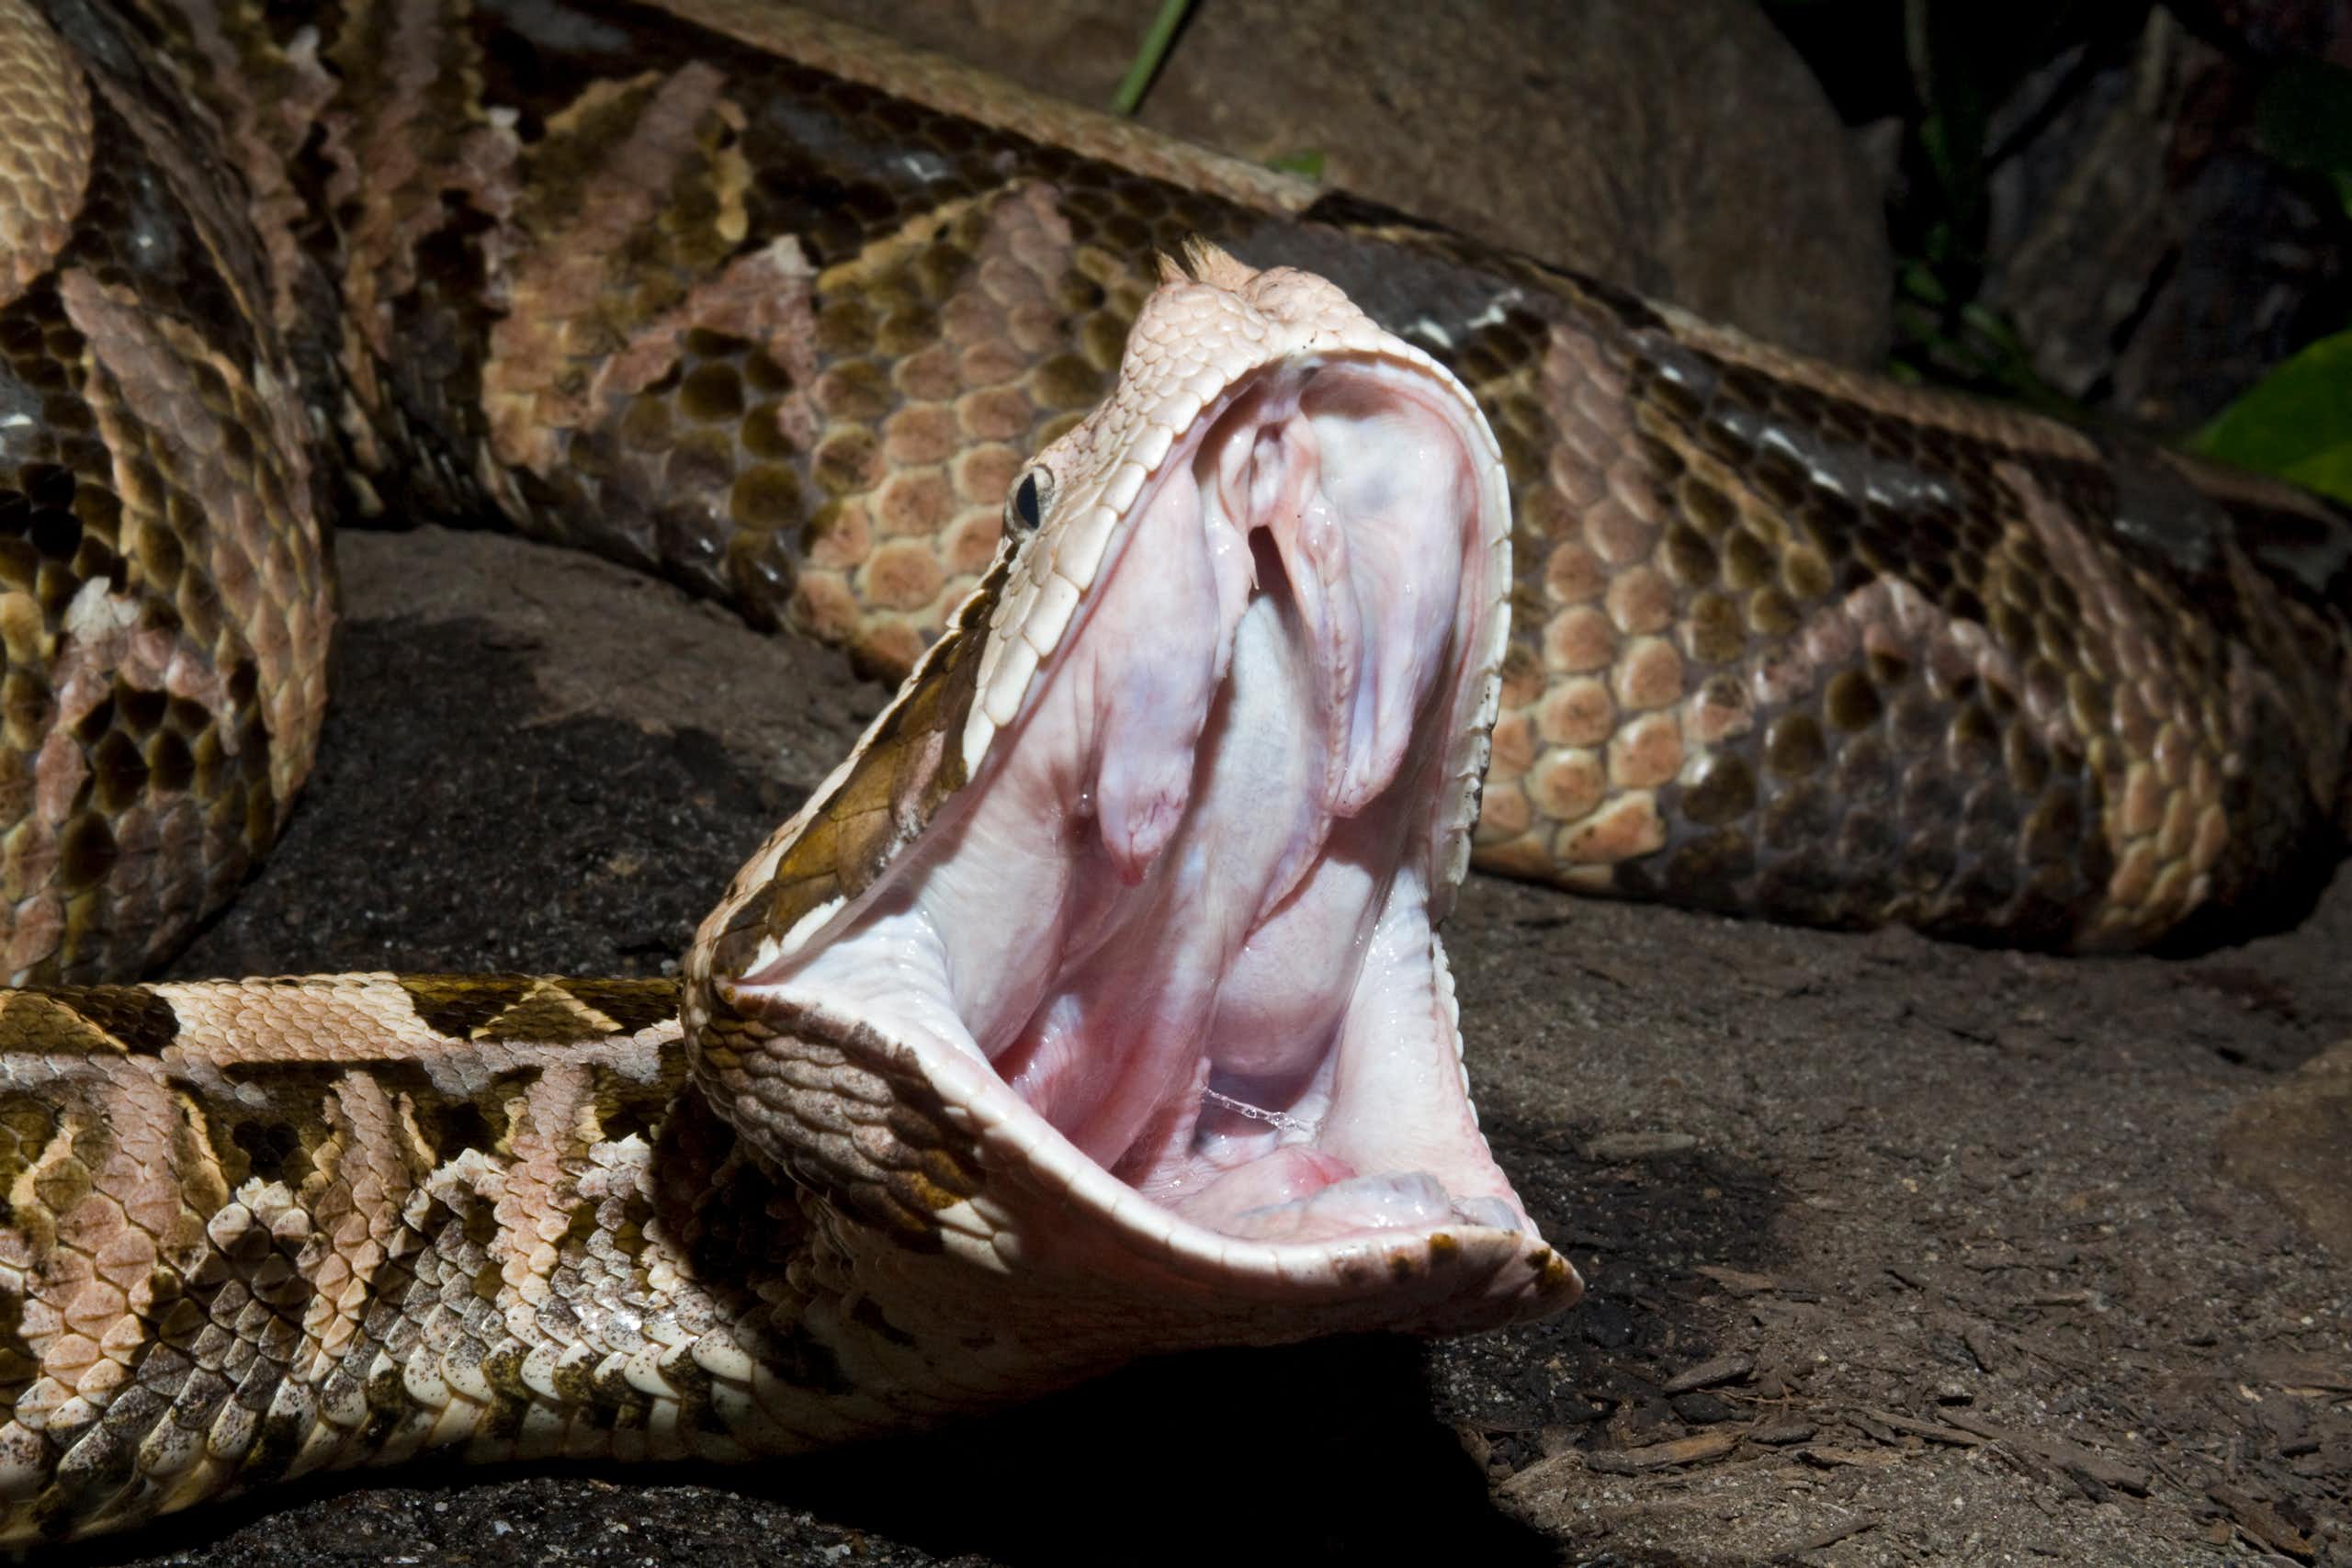 A Gaboon viper snake with its mouth open and fangs bared